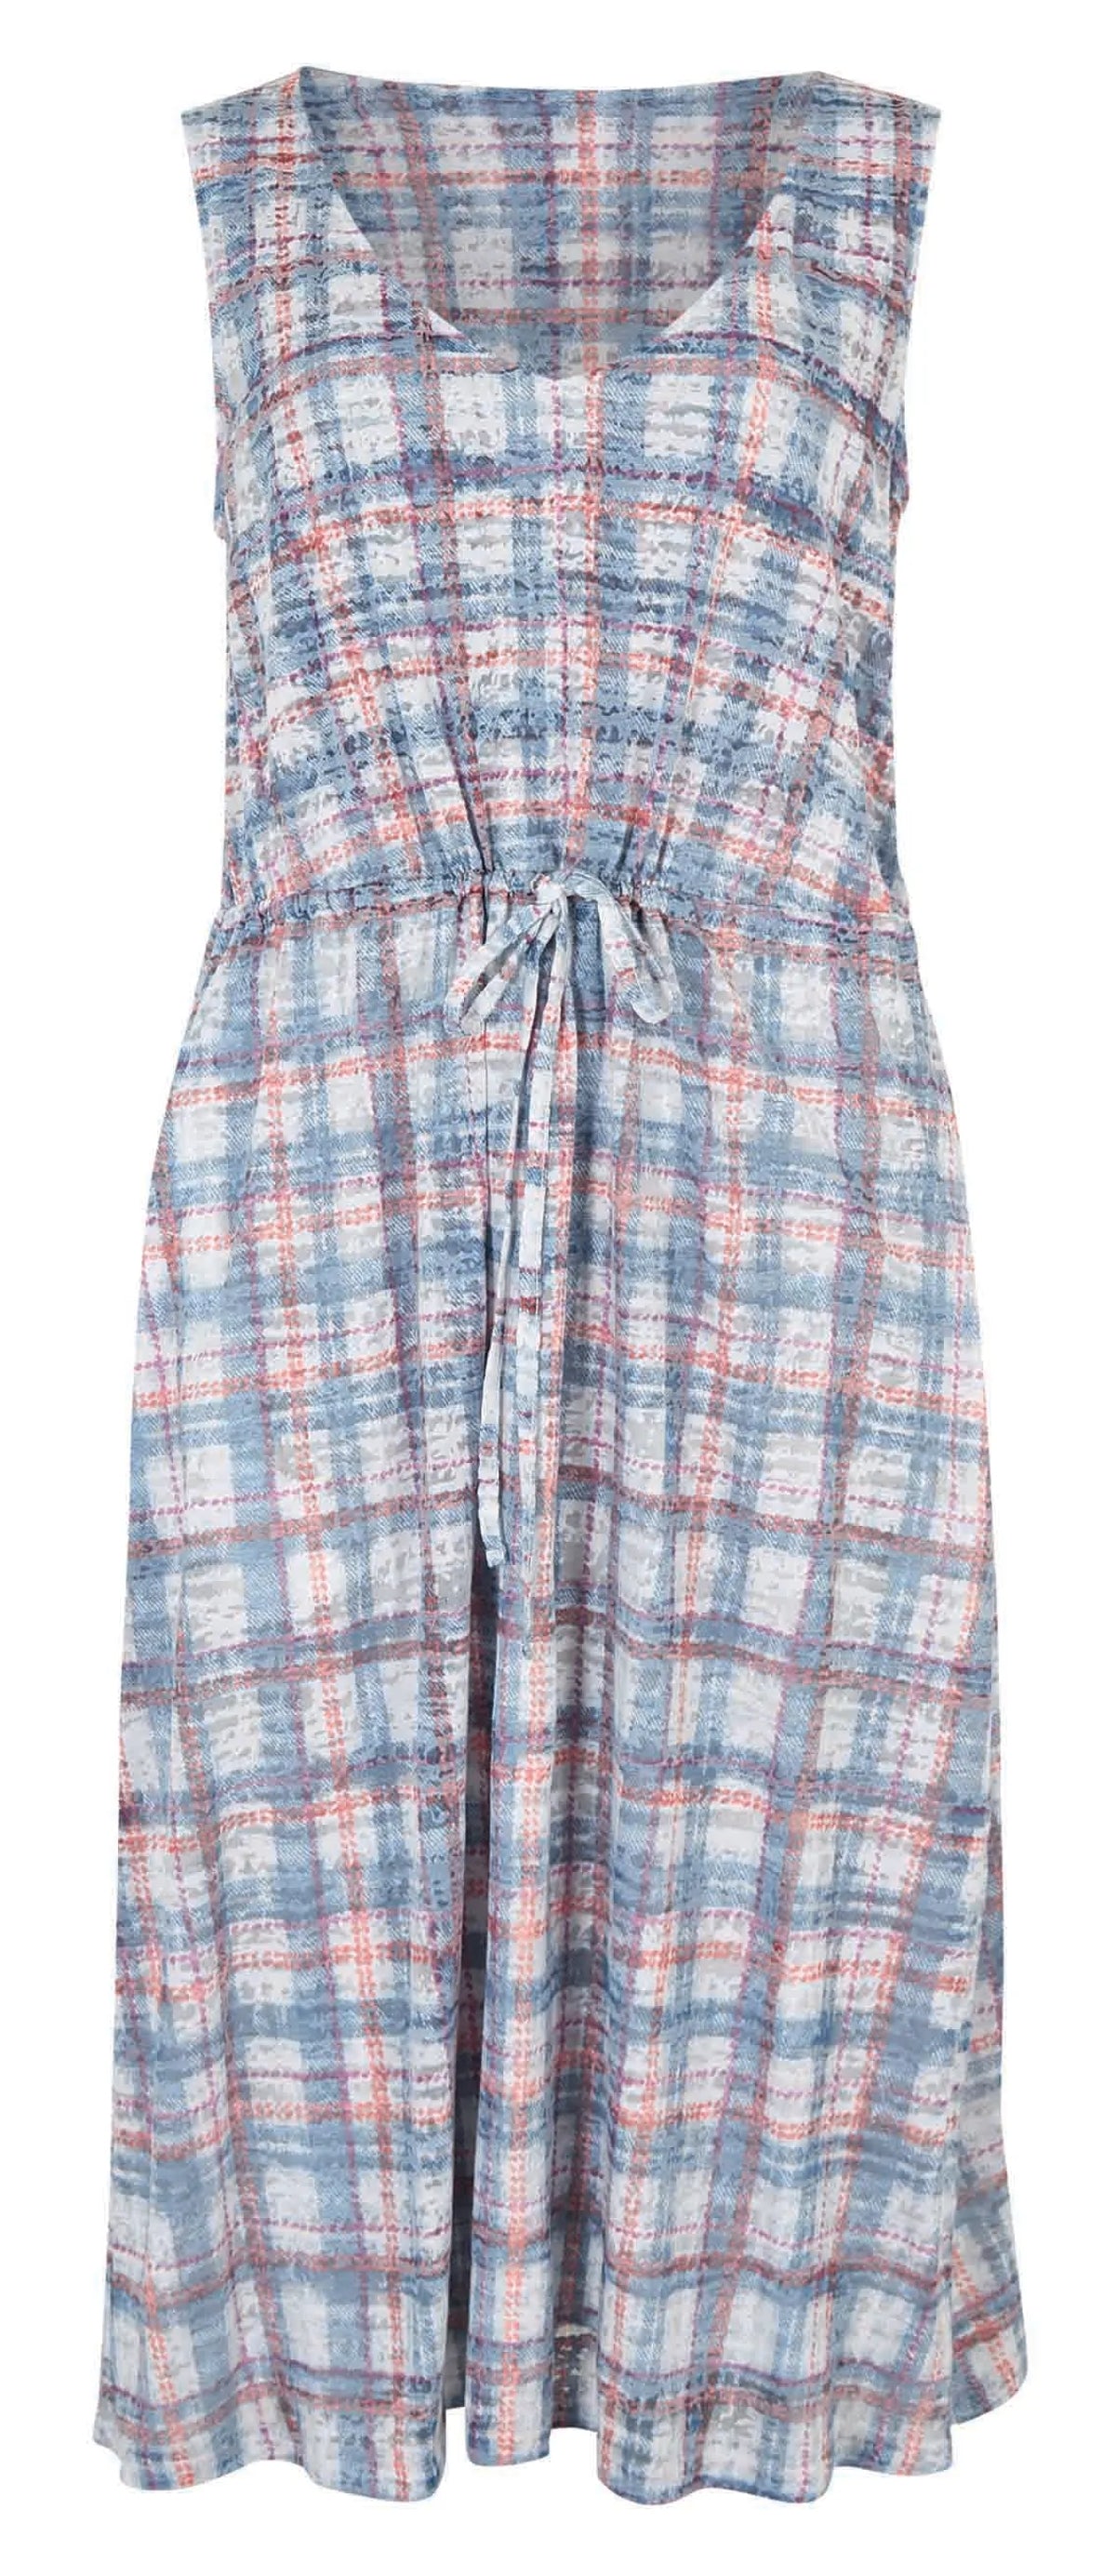 Sleeveless check patterned women's Teresia burnout dress from Weird Fish in blue and red.